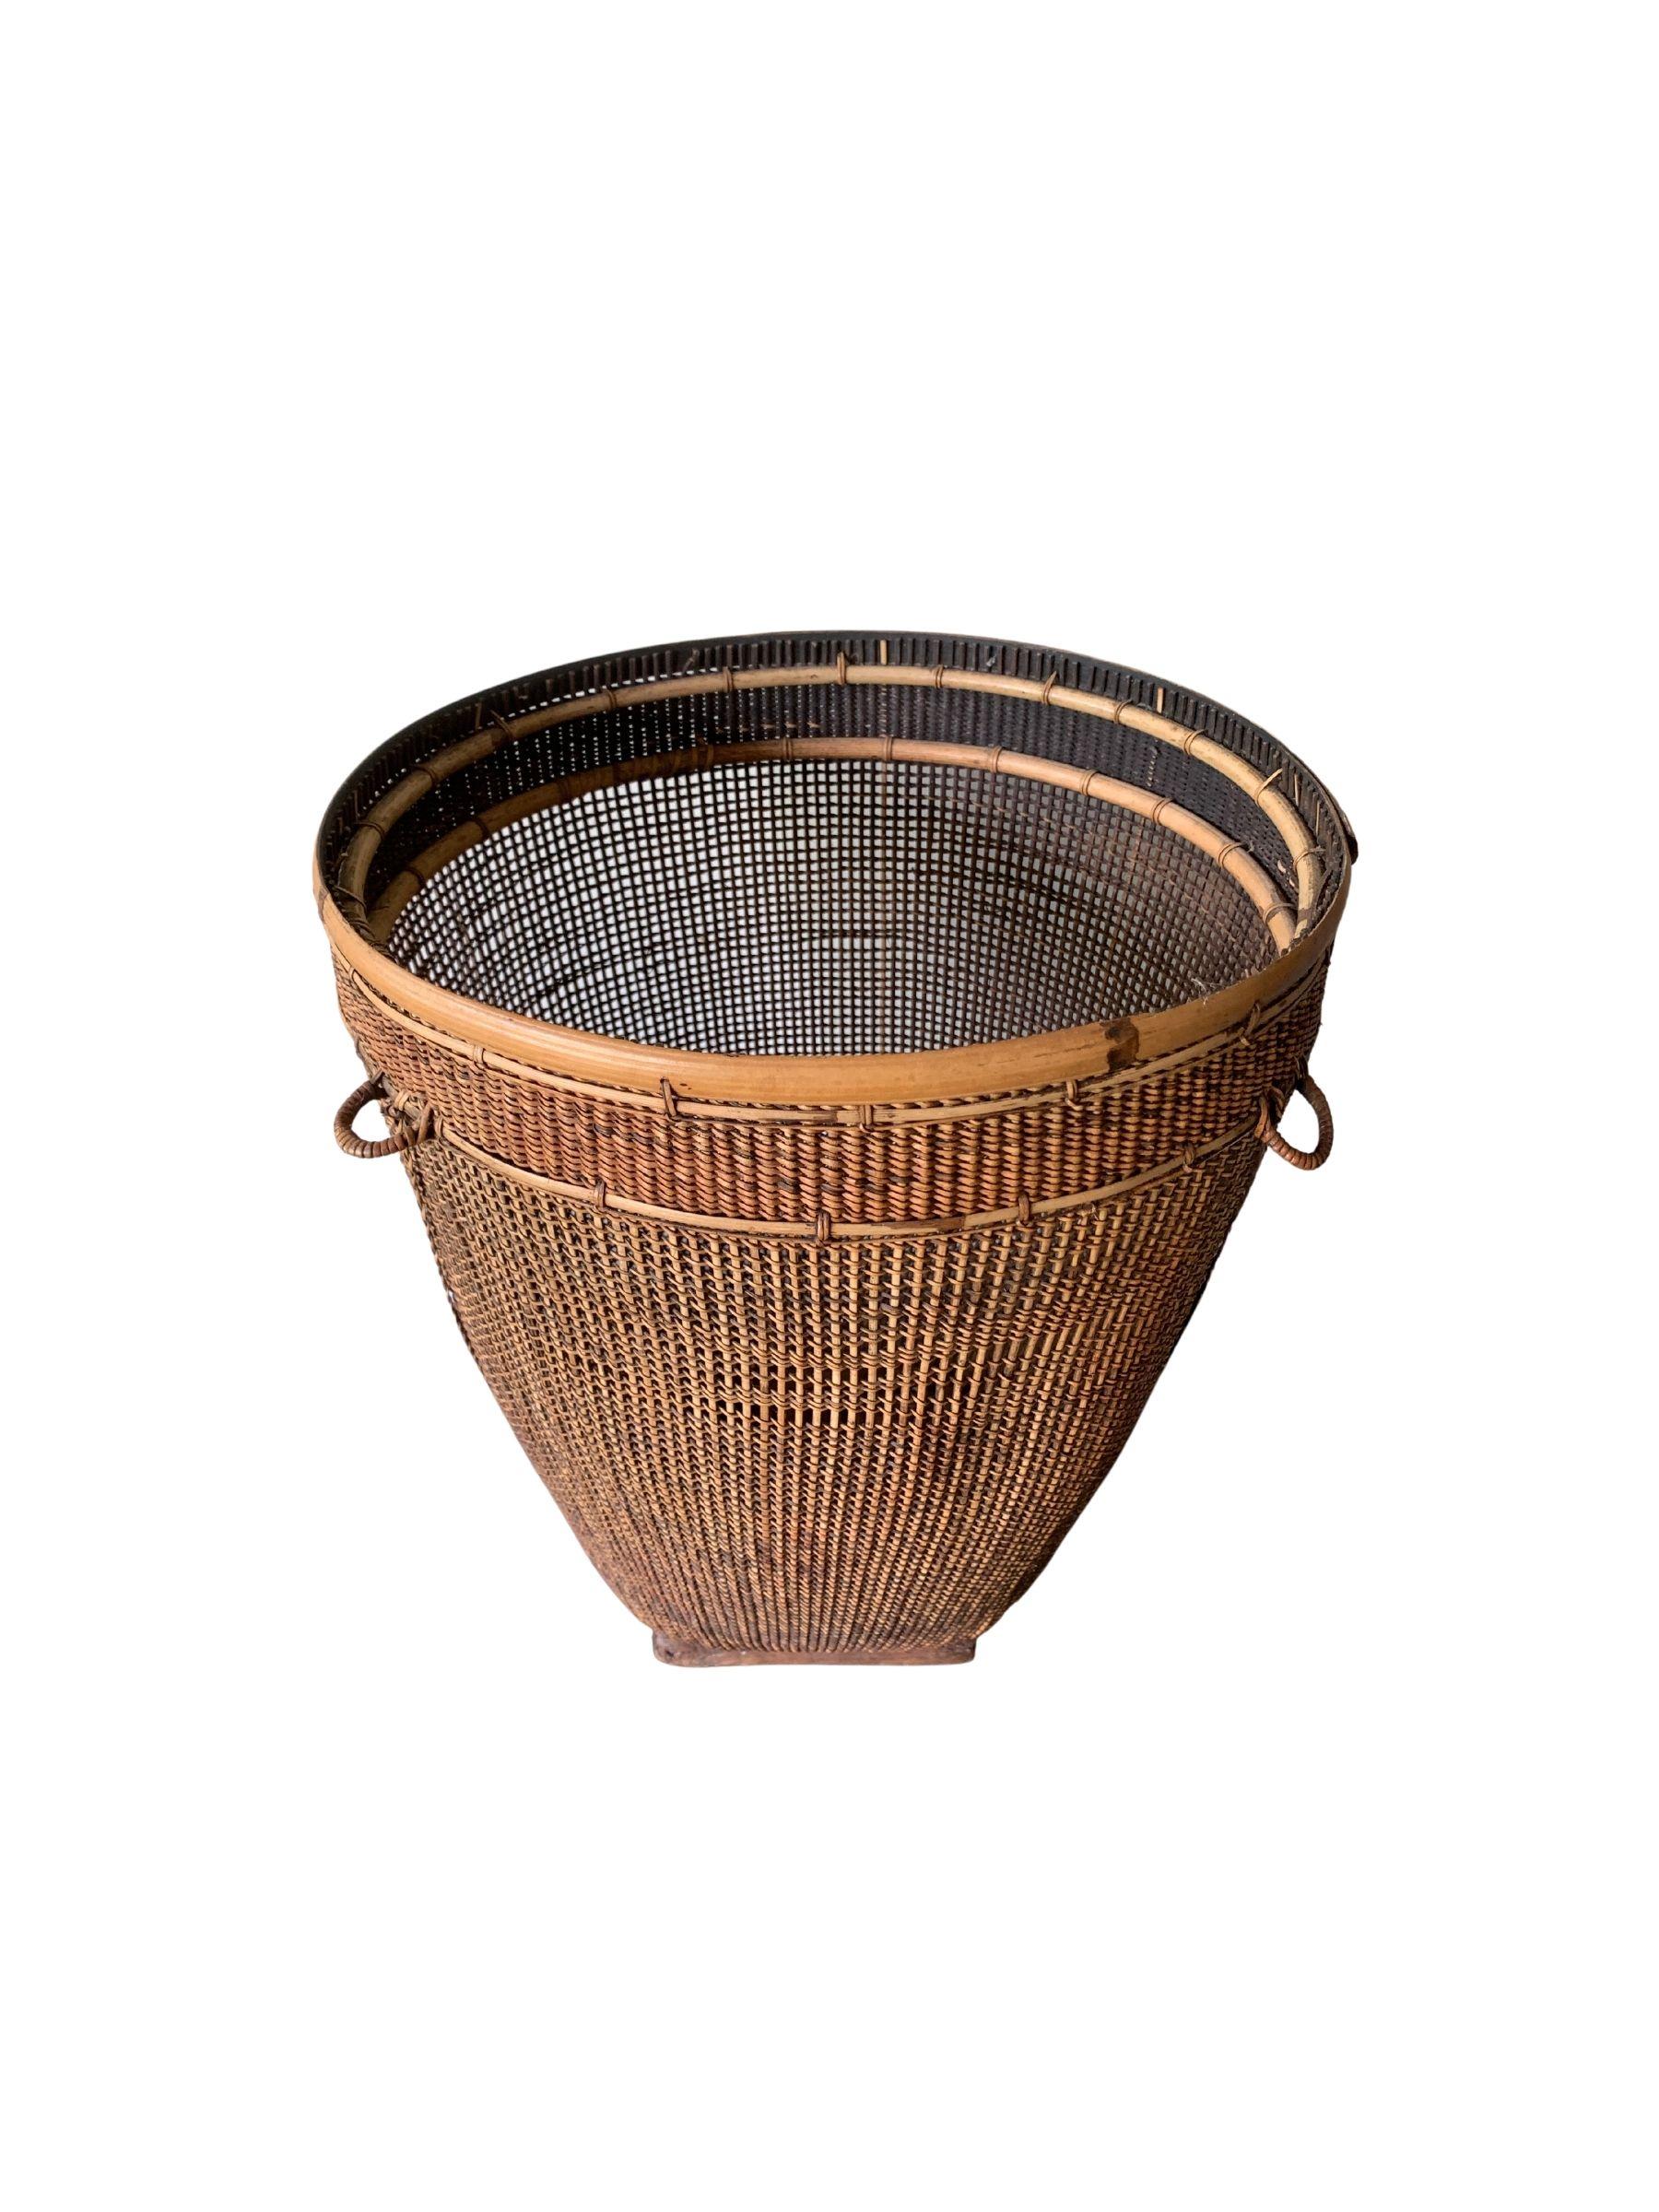 Hand-Woven Bamboo & Rattan Basket from Dayak Tribe, Hand-Crafted Borneo, Indonesia, c. 1950 For Sale